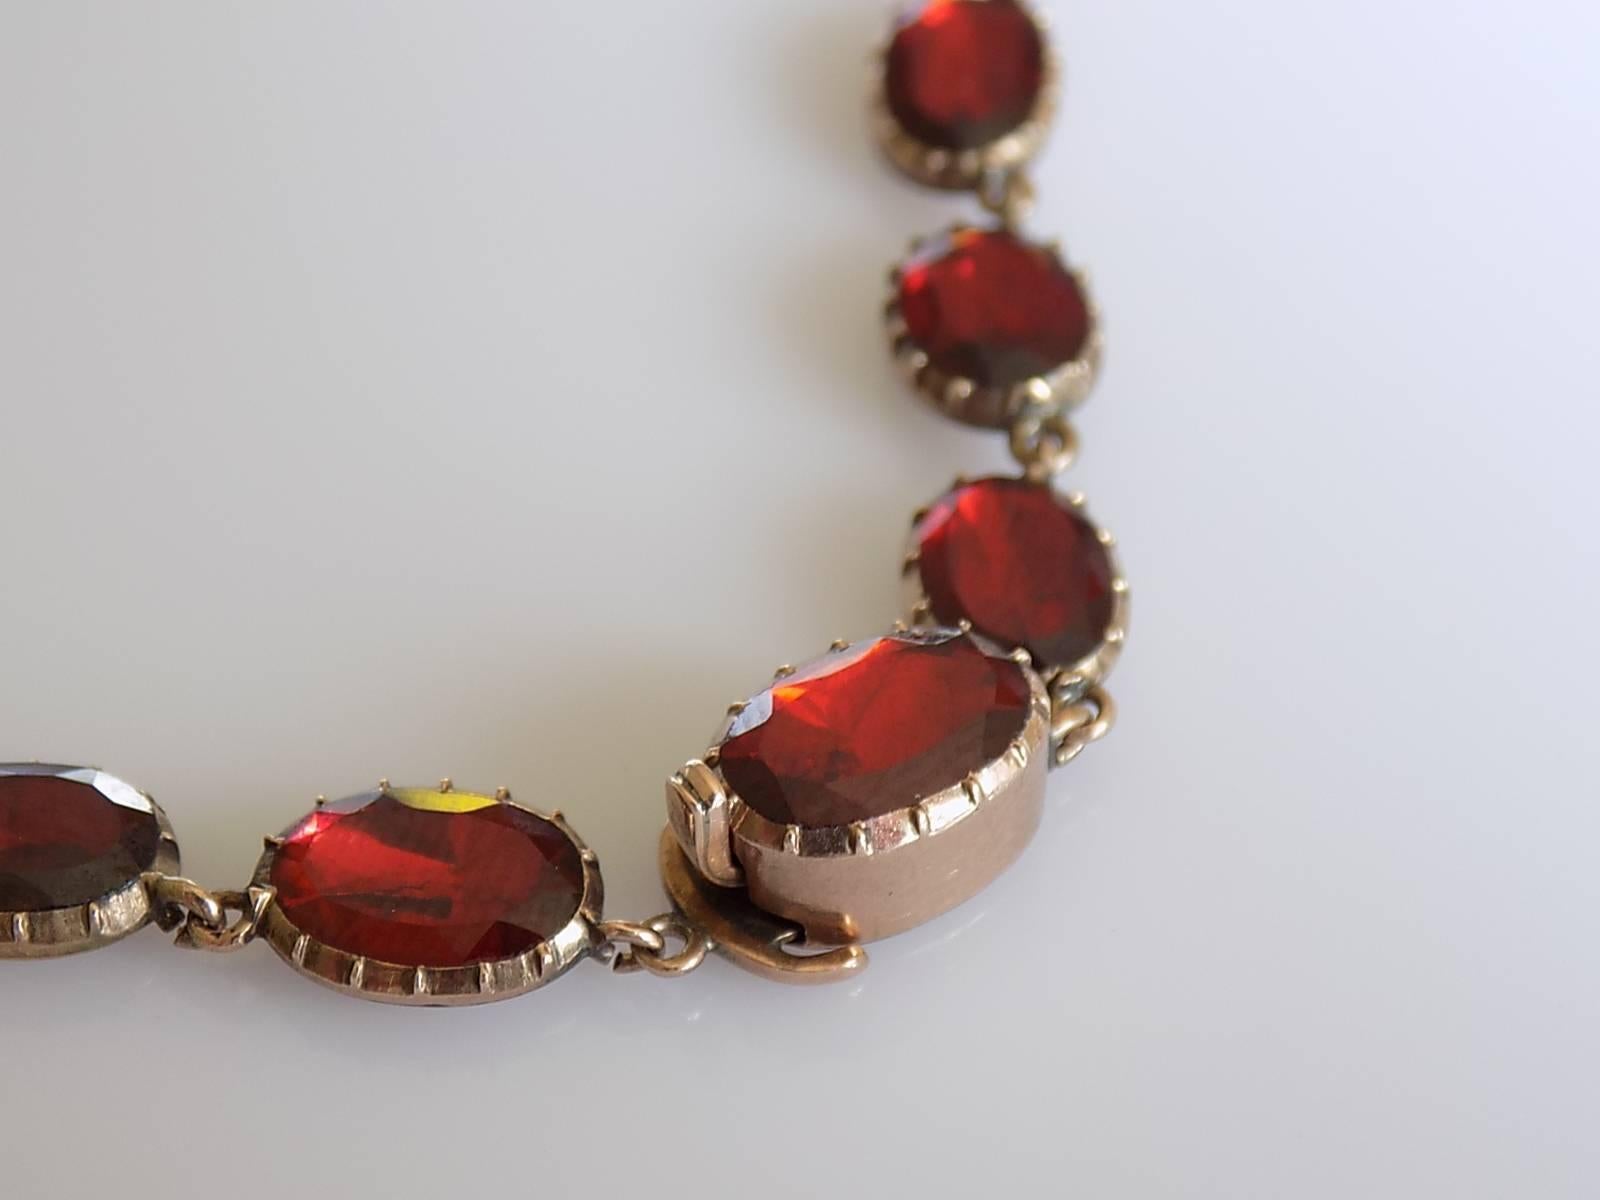 A Stunning Georgian c.1800 foil backed flat table cut Almandine Garnet Riviere necklace in 9 Carat Gold mount. The necklace complete with an original hinged catch ring for a pendant and push in clasp. English origin.
Total length including clasp 15